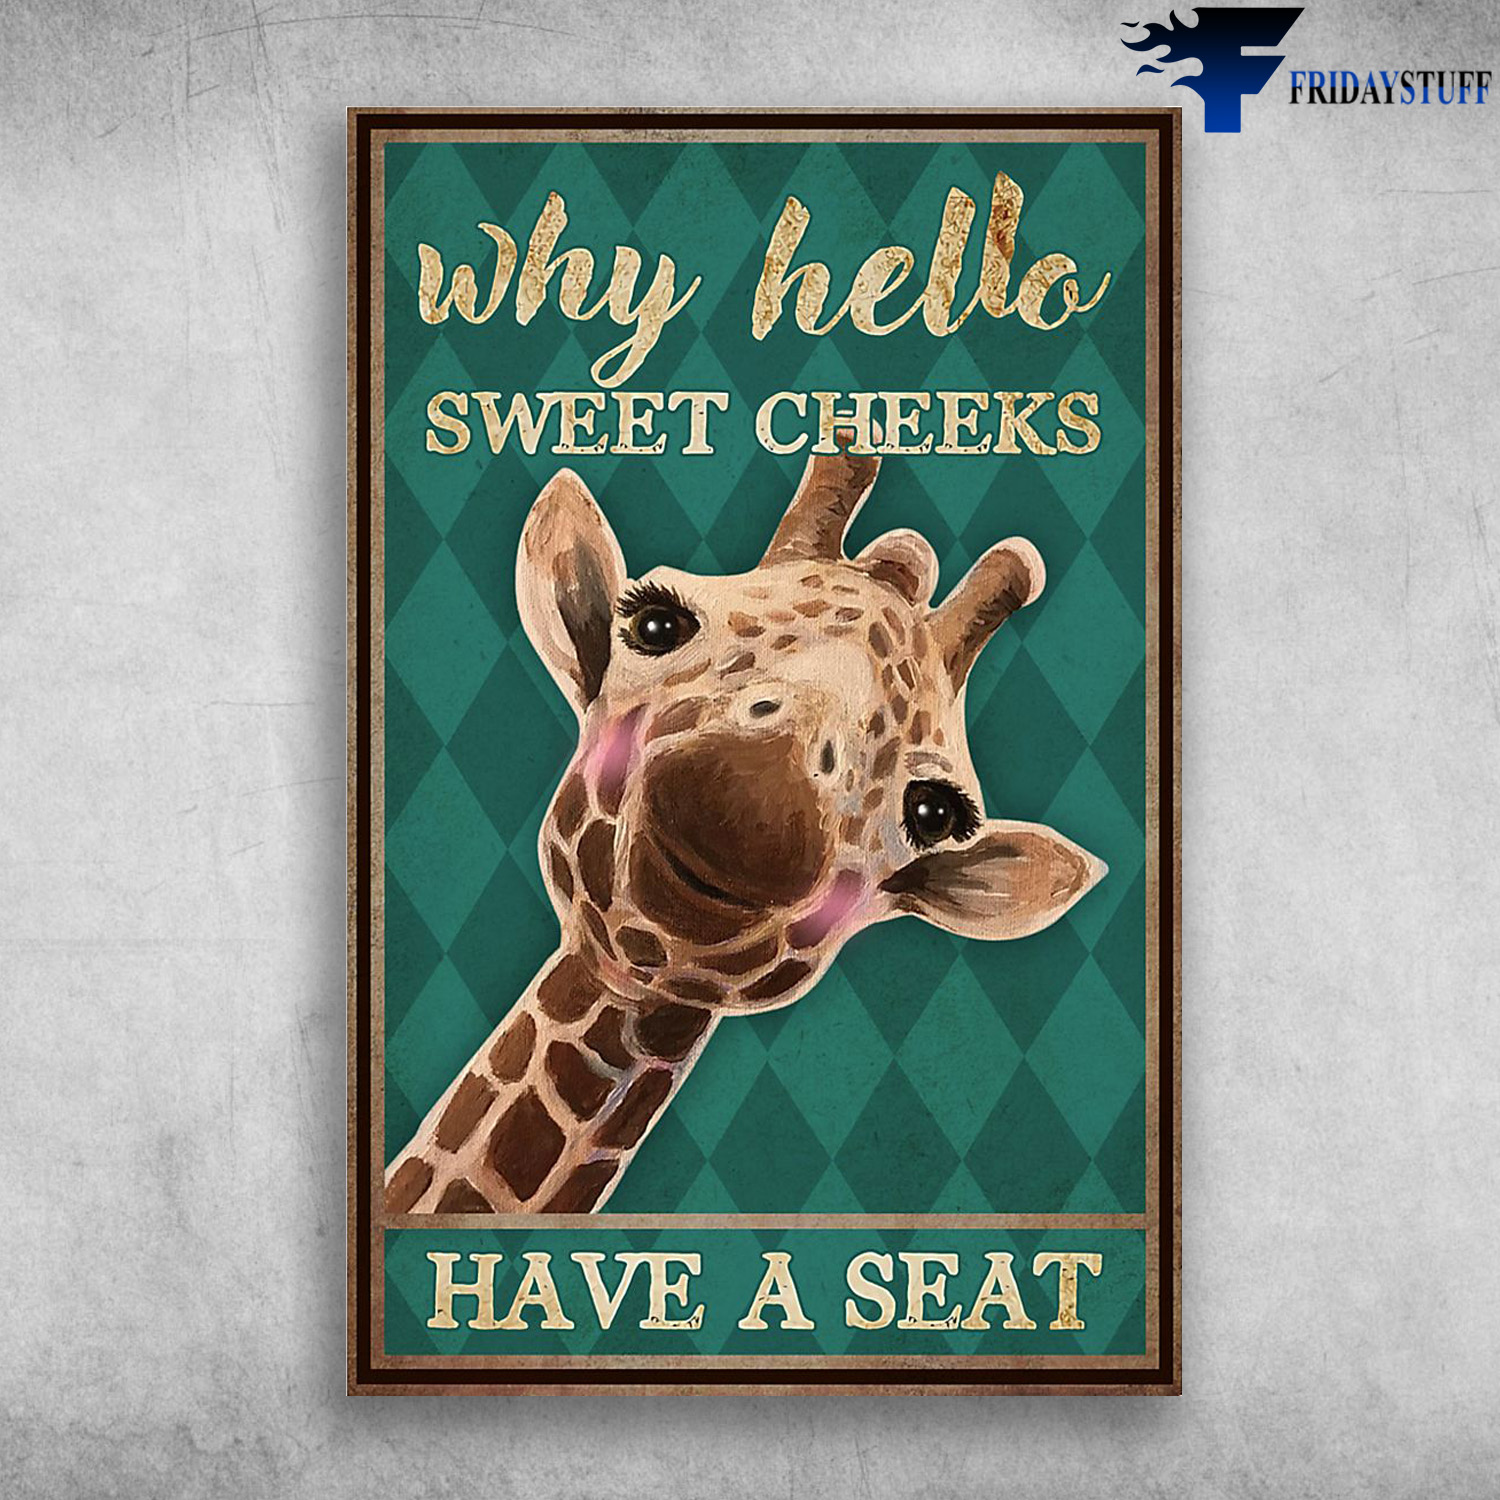 Cute Giraffe Smiling - Why Hello Sweet Cheels, Have A Seat